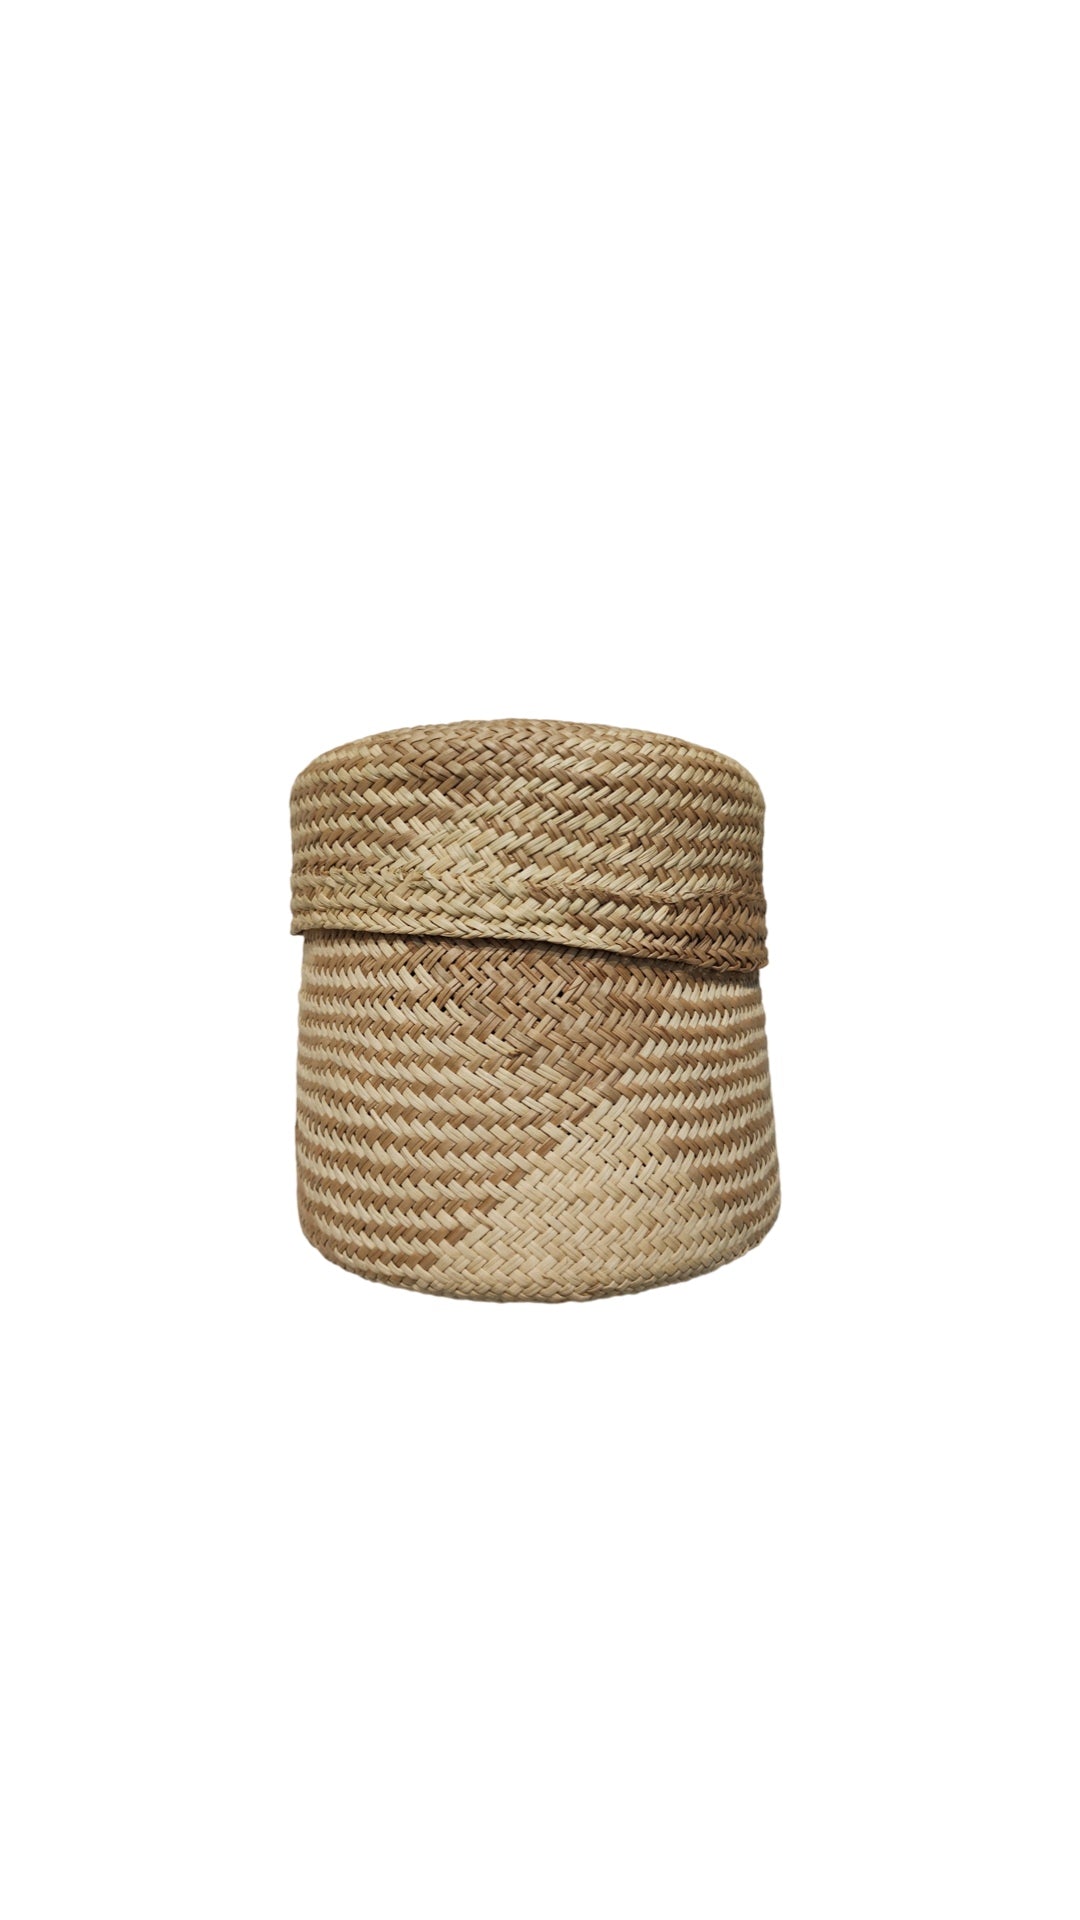 Handwoven iraca basket 'Square Toasted', small